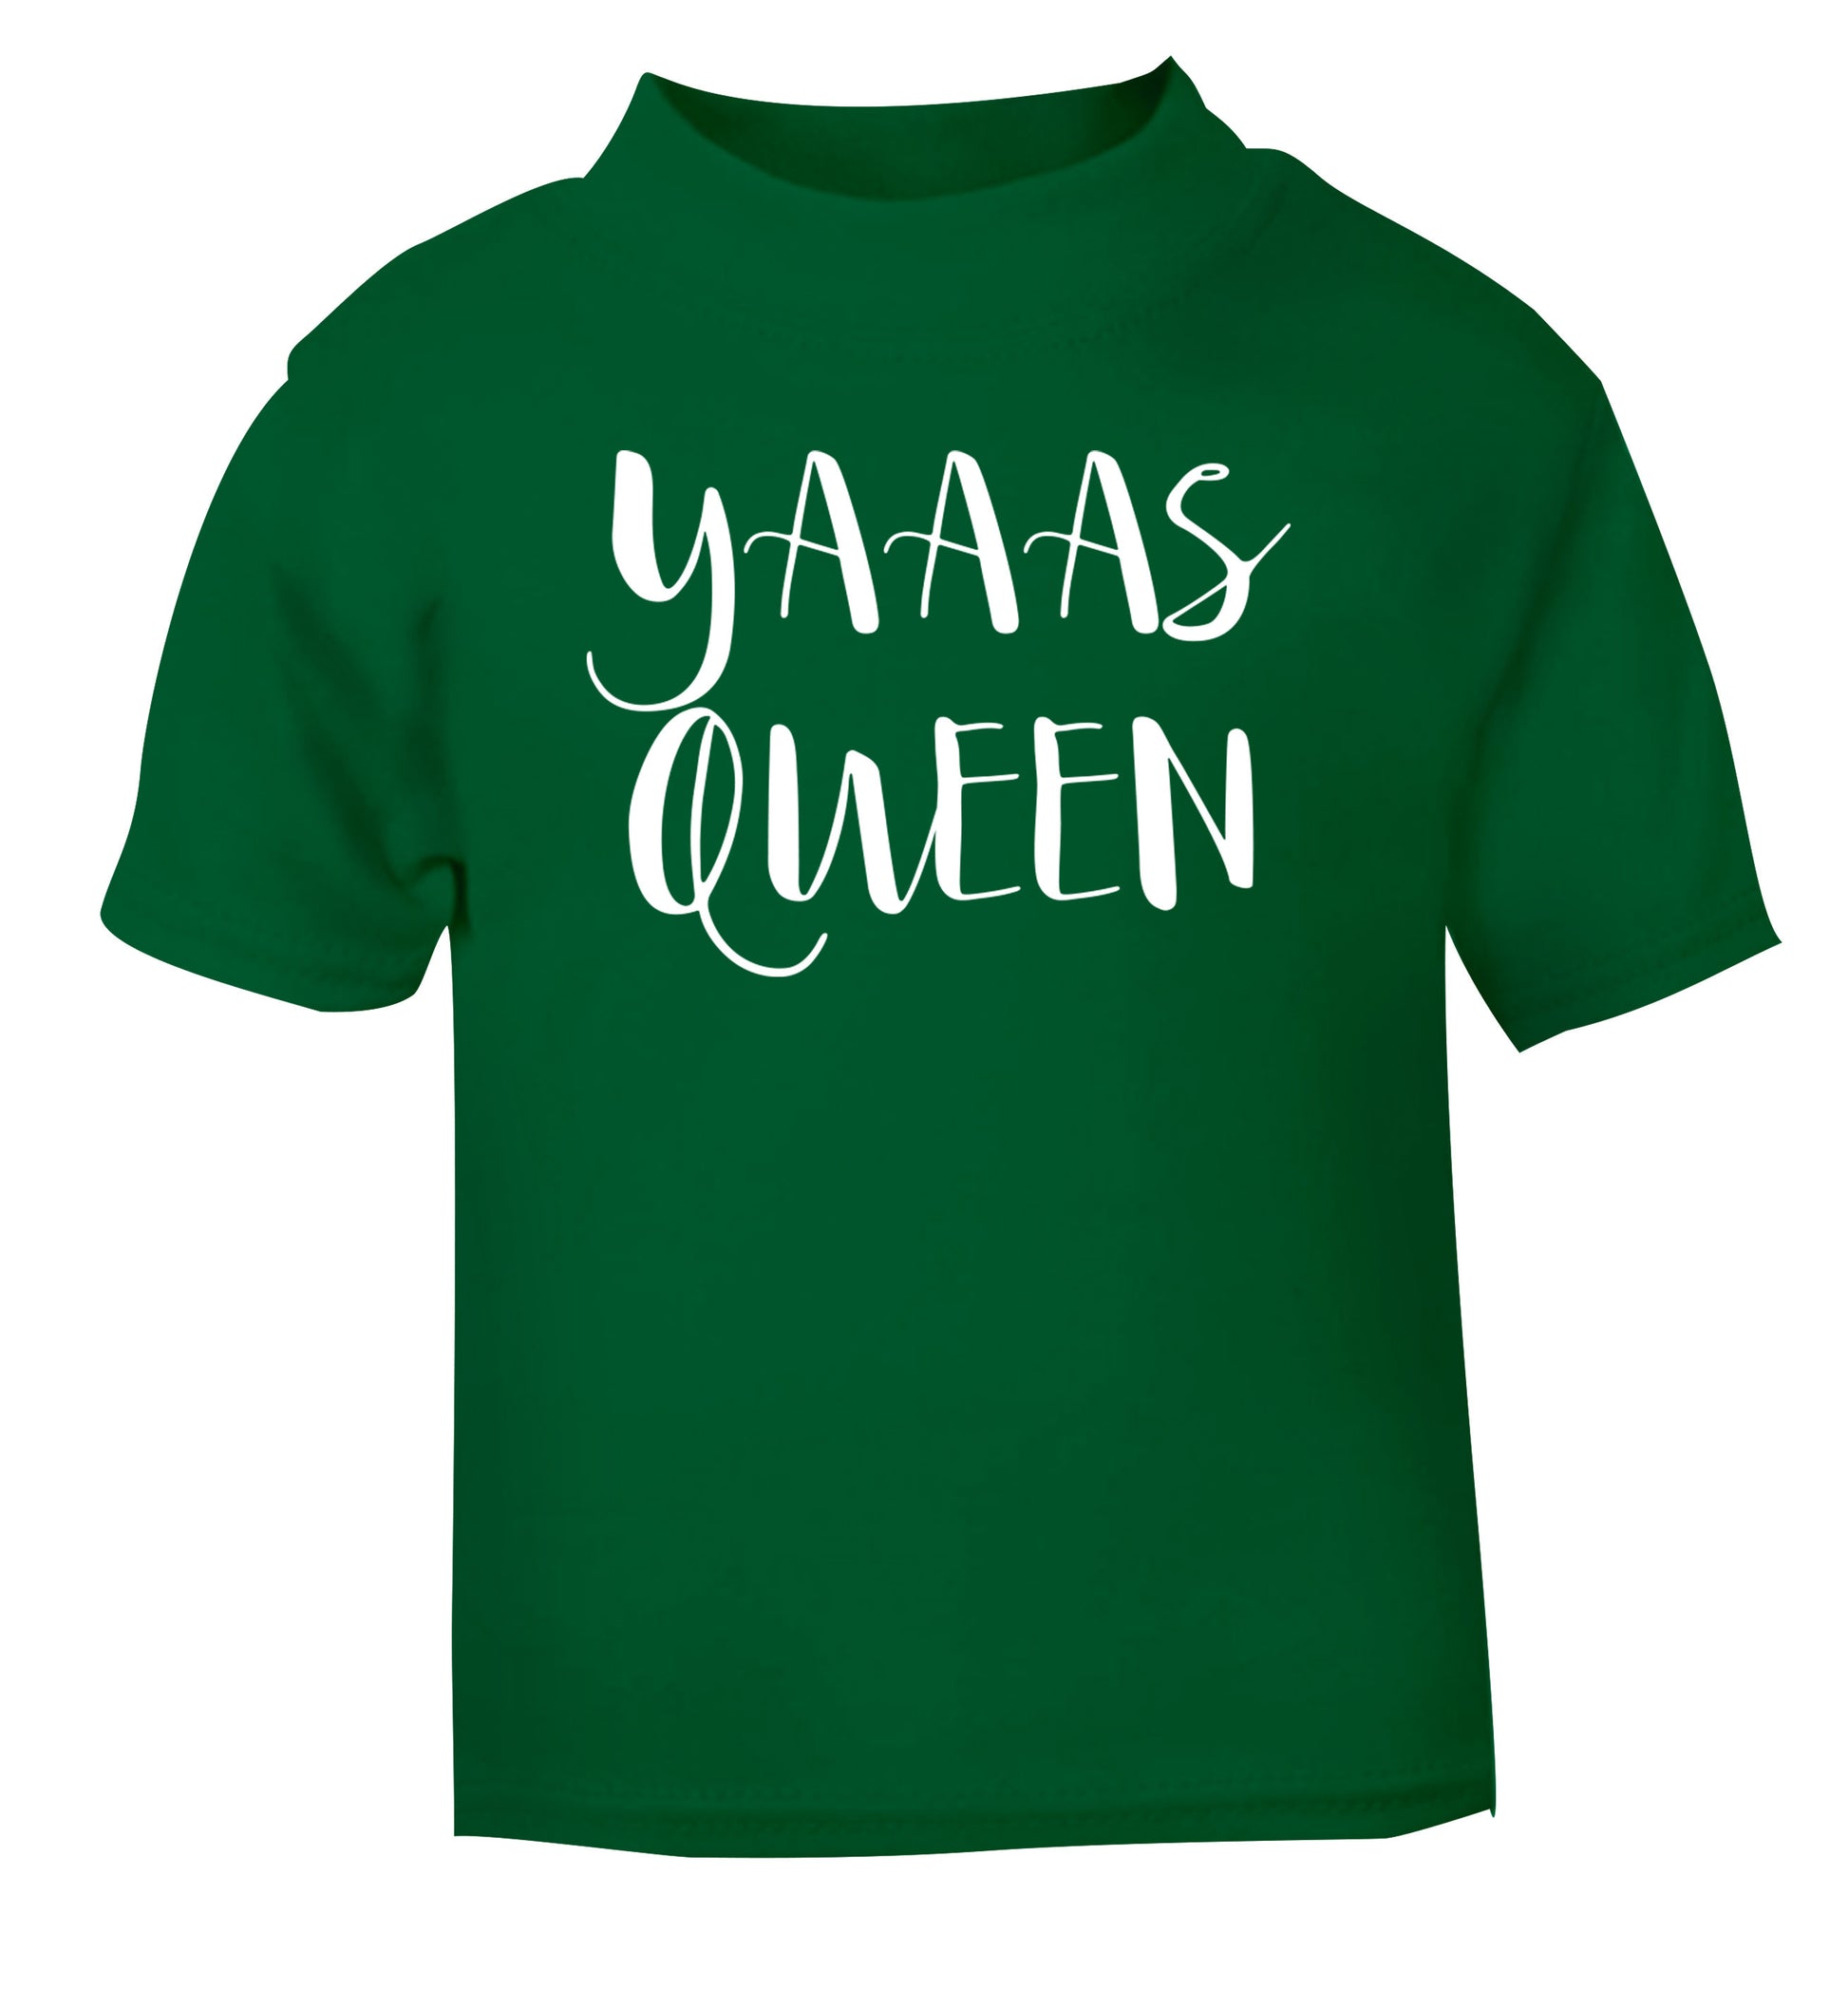 Yas Queen green Baby Toddler Tshirt 2 Years